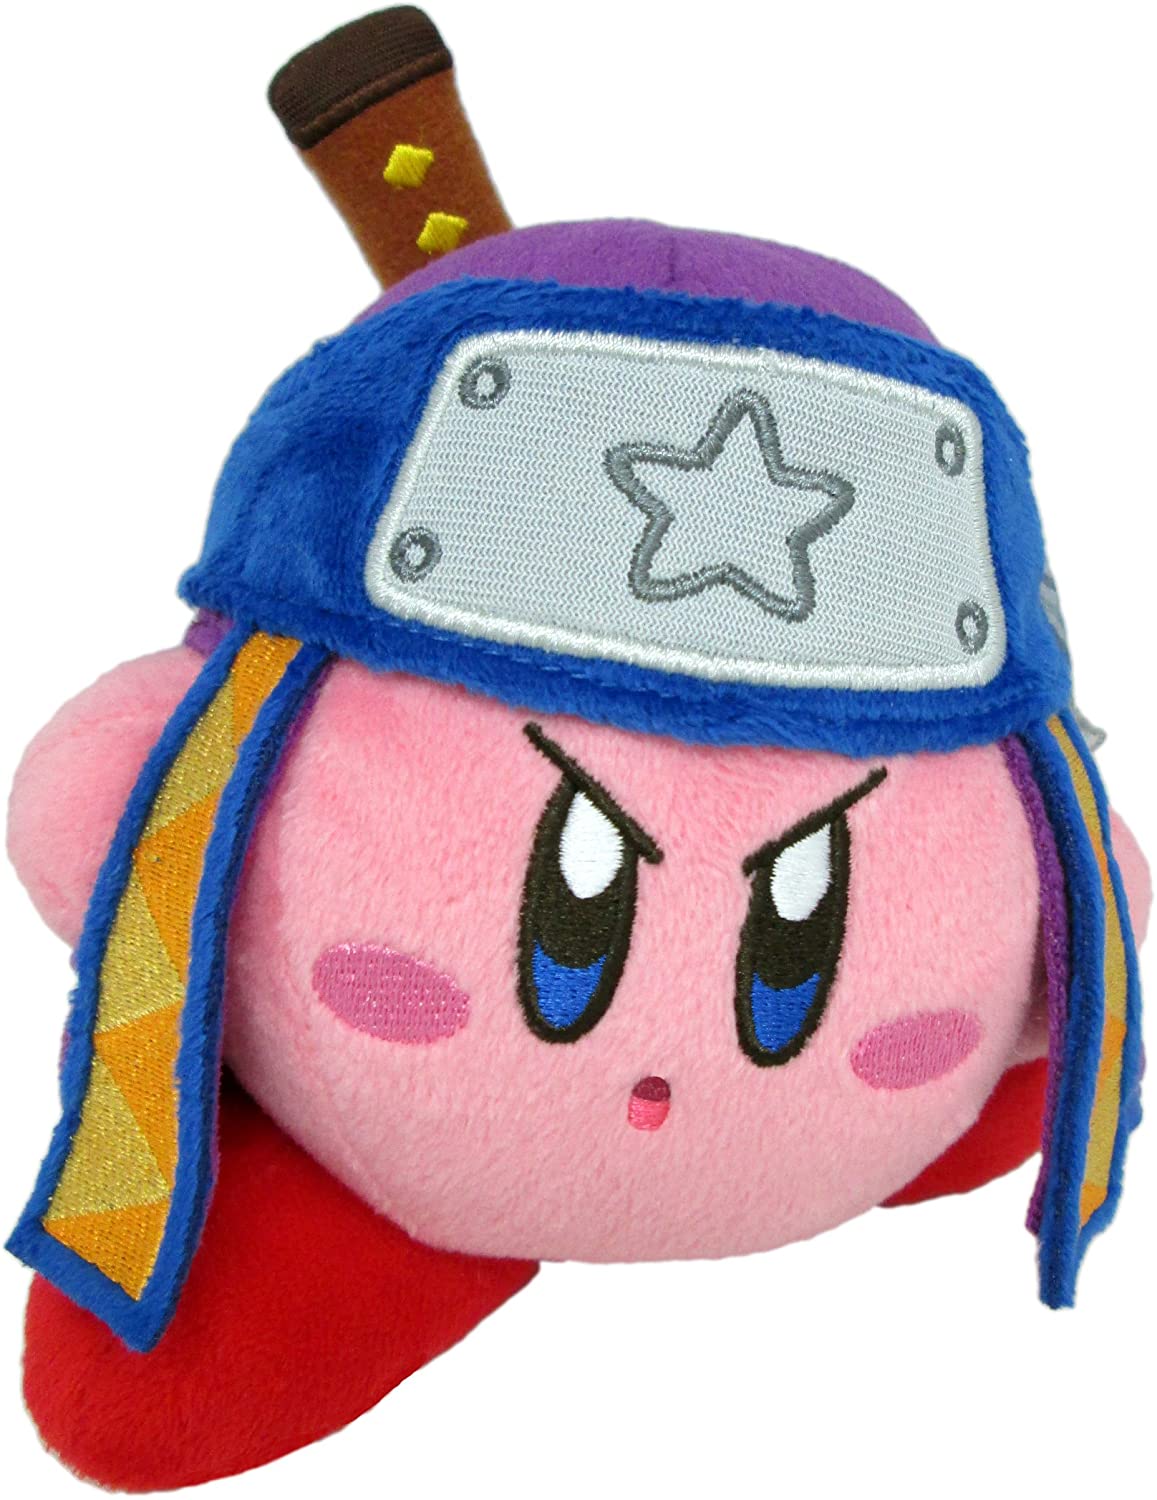 Little Buddy Kirby's Adventure All Star Collection Ninja Kirby Plush, 5" - Super Anime Store FREE SHIPPING FAST SHIPPING USA